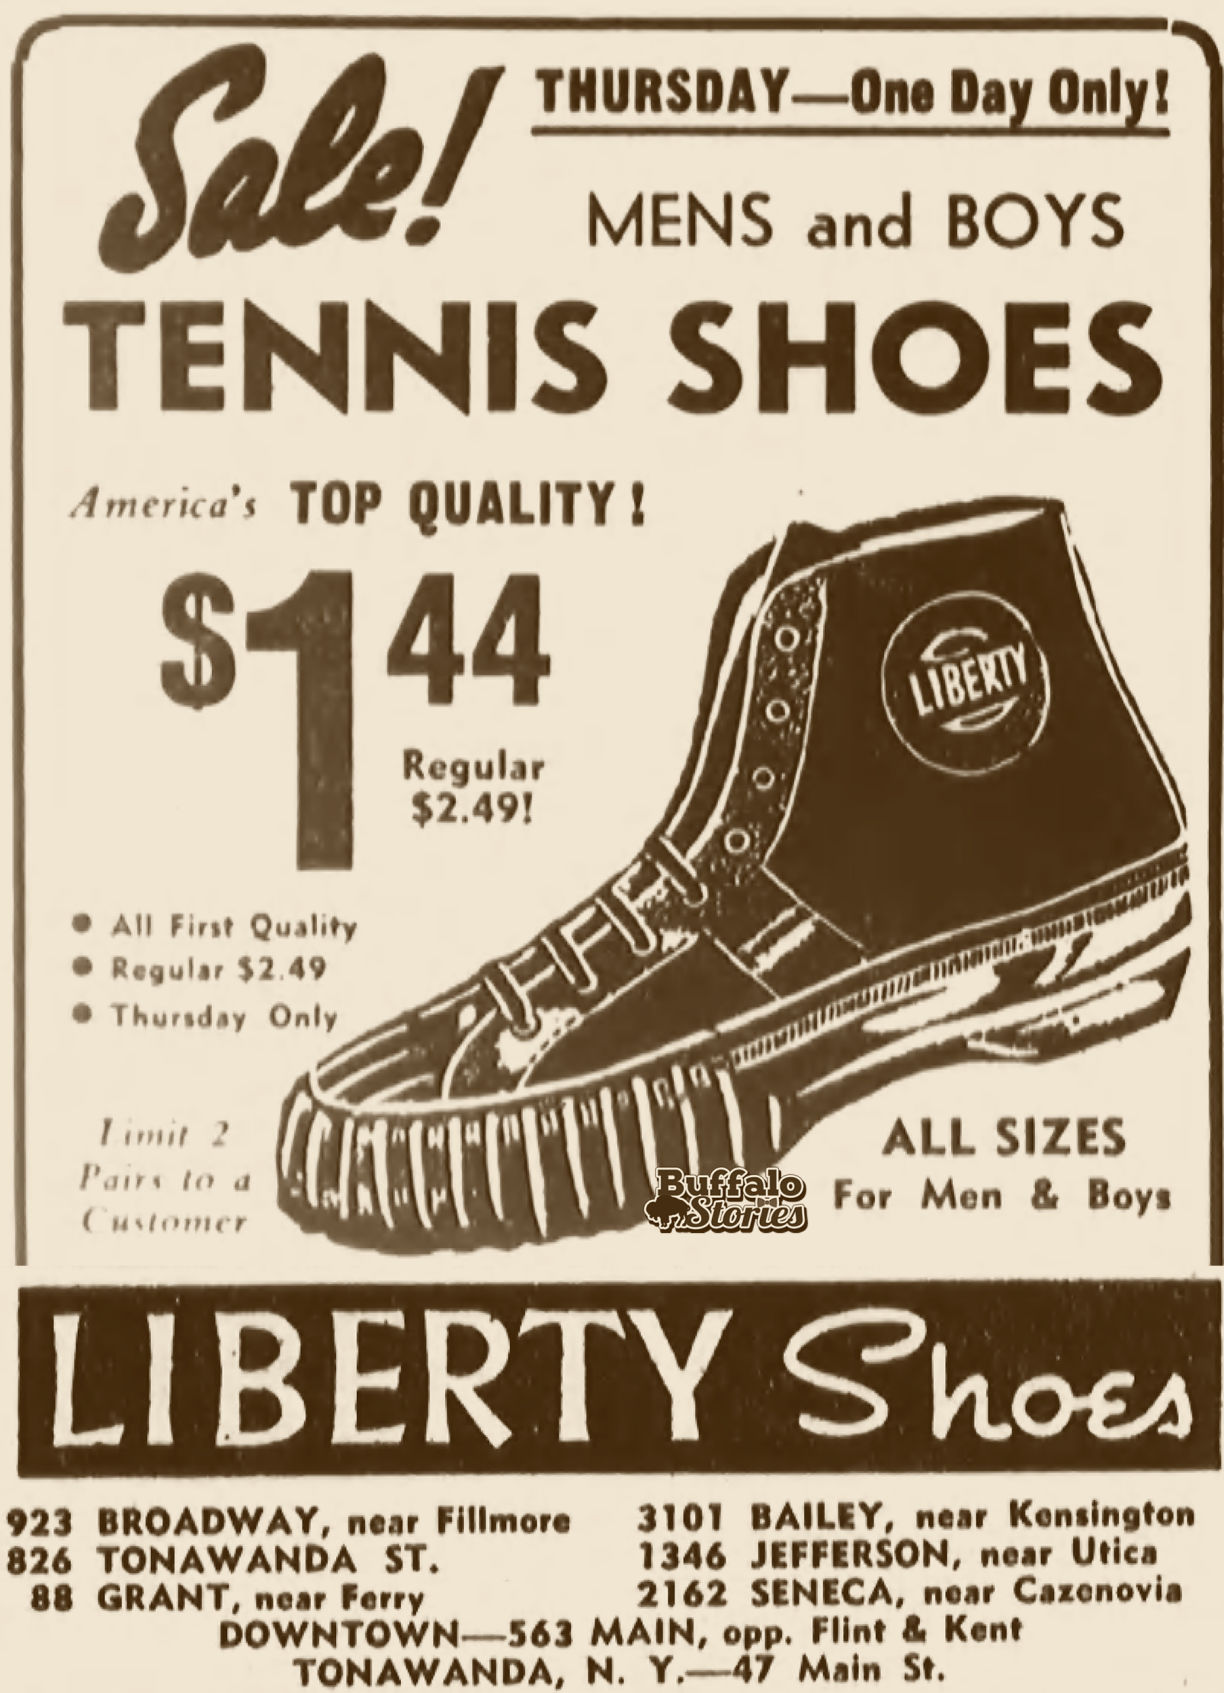 Buffalo in the '50s: Liberty Shoes had 